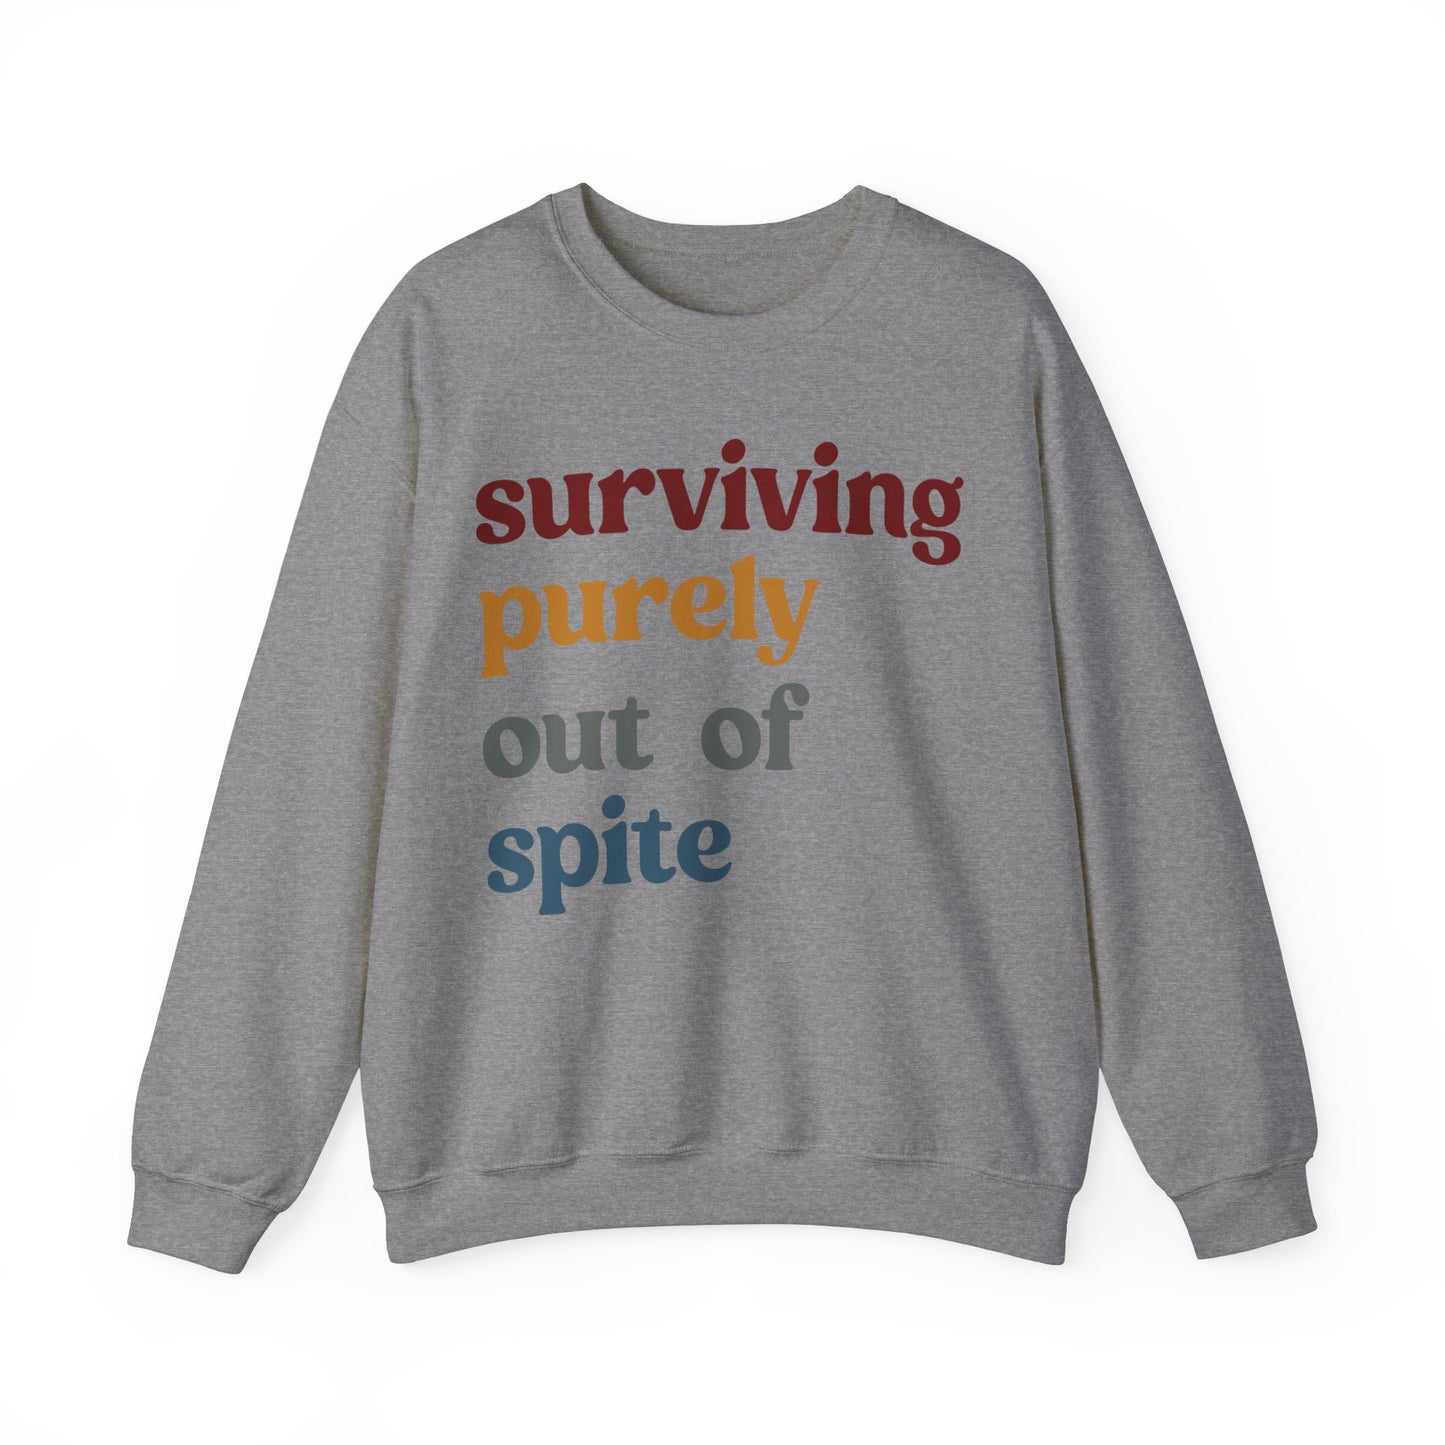 Surviving Purely Out of Spite Sweatshirt, Mental Health, Cancer Survivor, Survivor Sweatshirt, Strong Empowered Women, Iron Lady, S1407